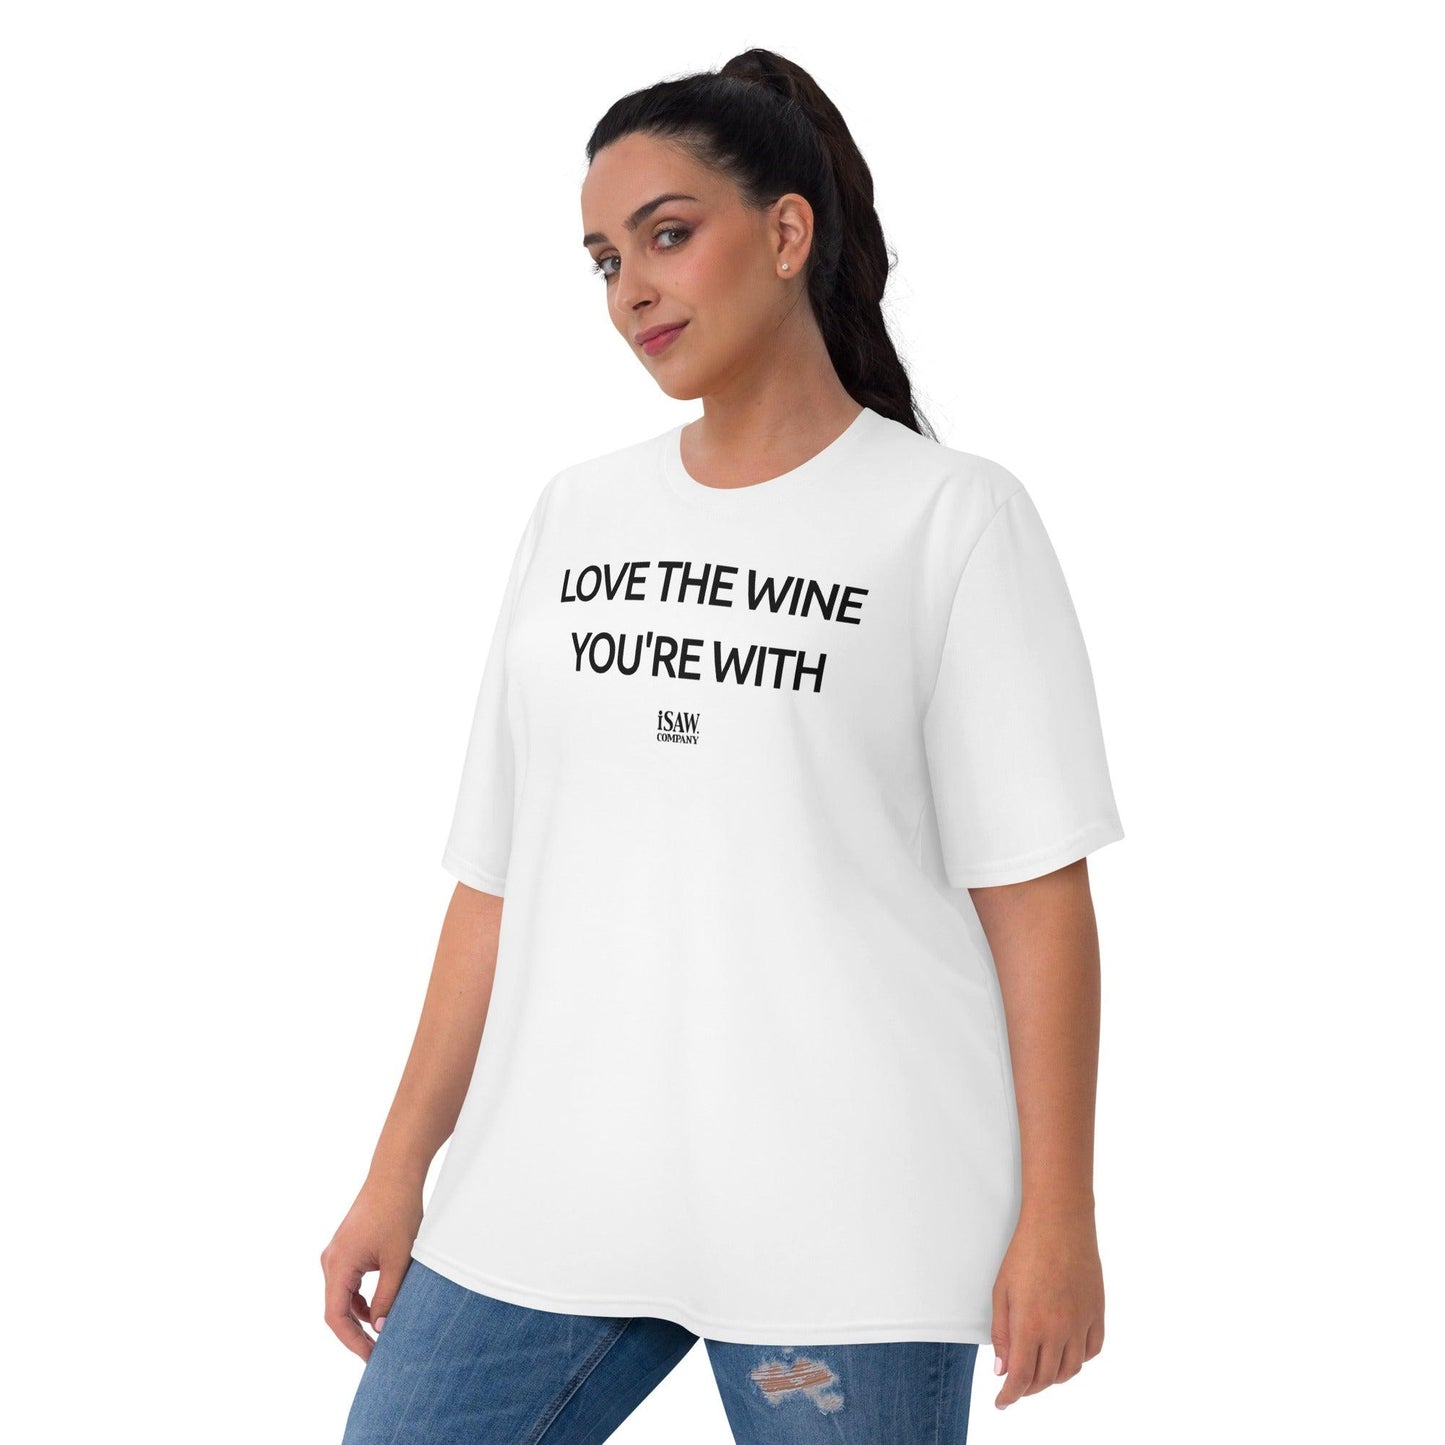 Love The Wine You’re With - Womens White T-Shirt - iSAW Company